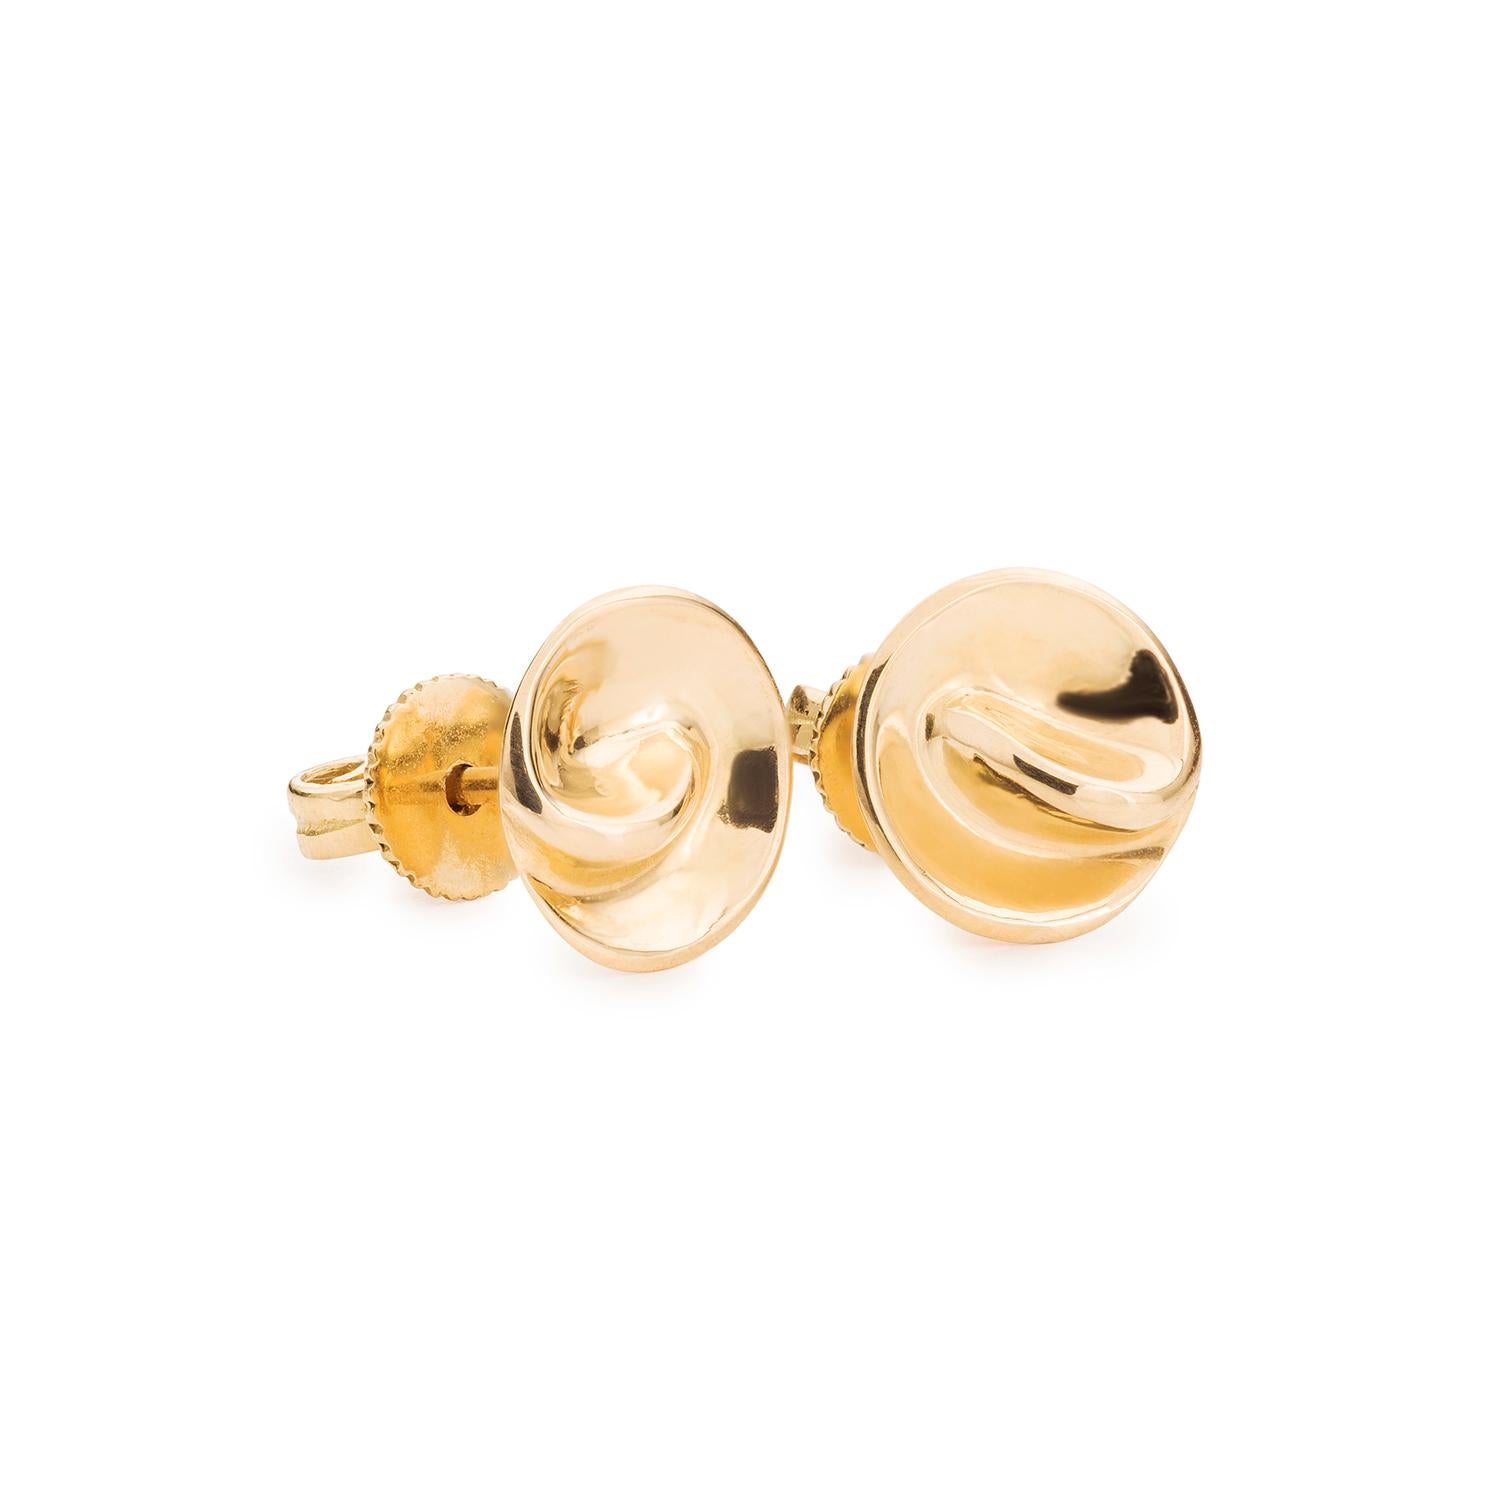 A timeless stud earring handcrafted in Spain from certified good delivery 18k yellow gold.
Diameter is 9mm. Post stud fastening.
Available in other hues of gold please contact customer care.

ABOUT THE BRAND
ABOY, a handcrafted fine jewellery brand